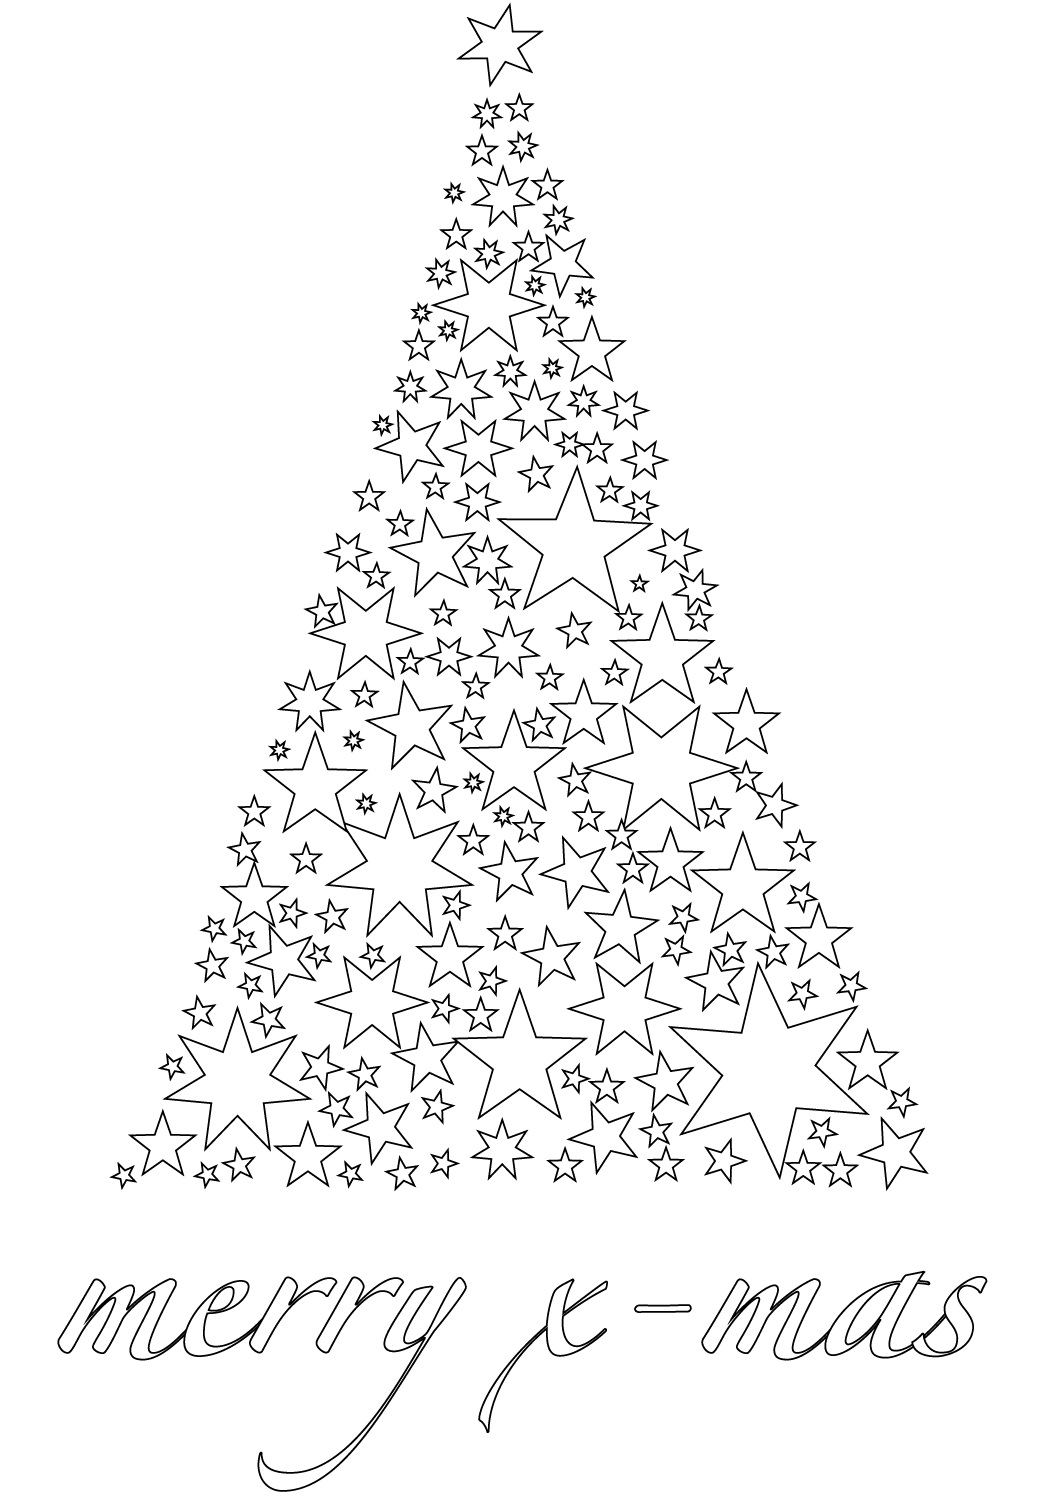 Merry Christmas Greeting Card Coloring Page